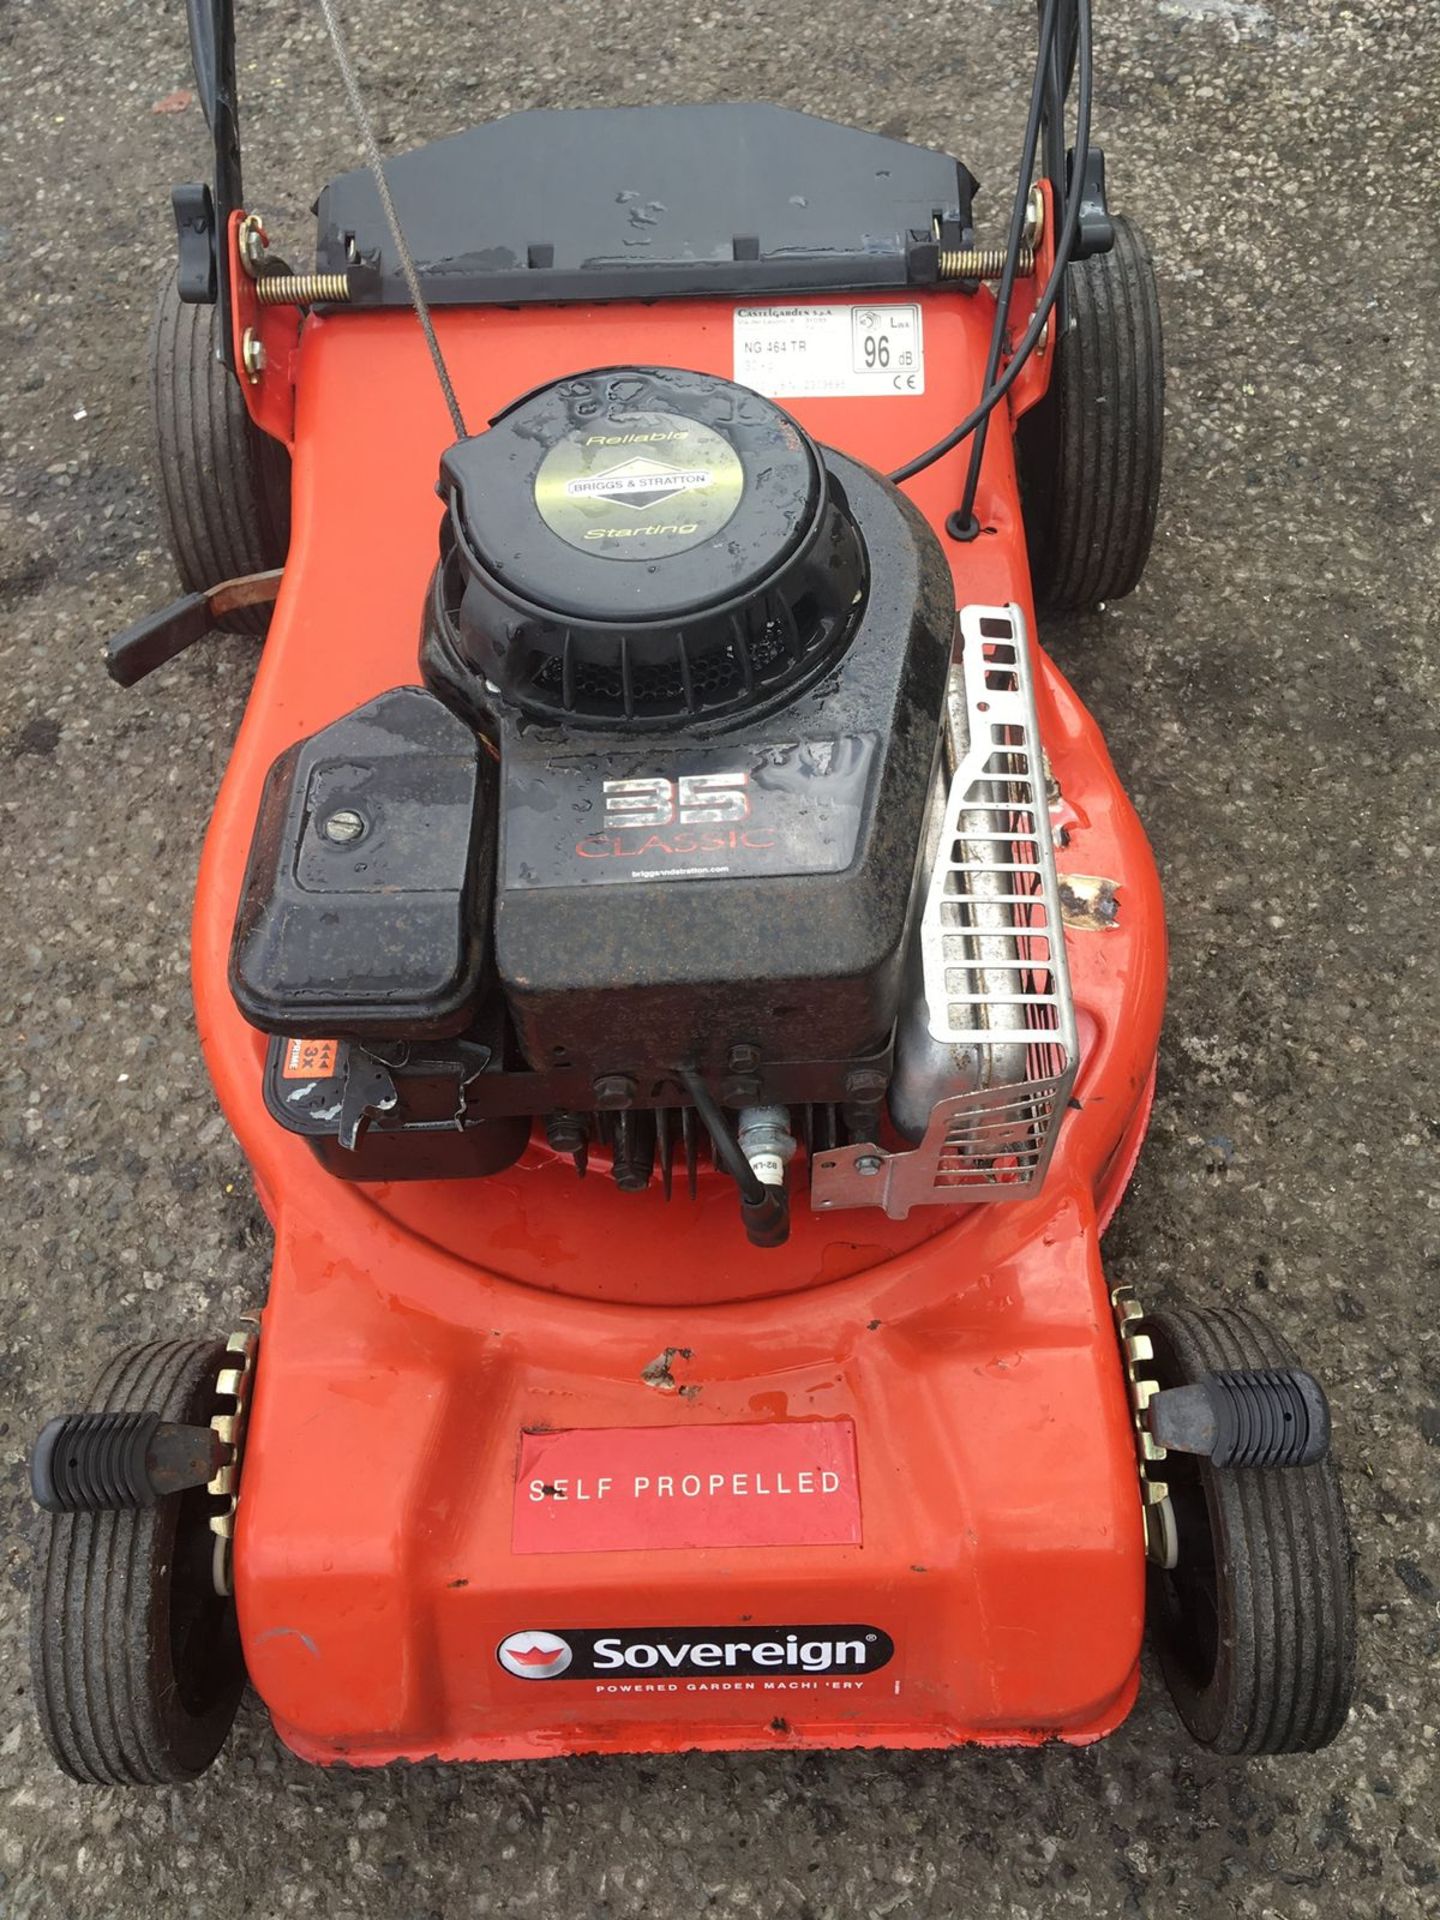 2 x LAWN MOWERS, FLYMO L470, SOVEREIGN, UNTESTED *NO VAT* - Image 3 of 7